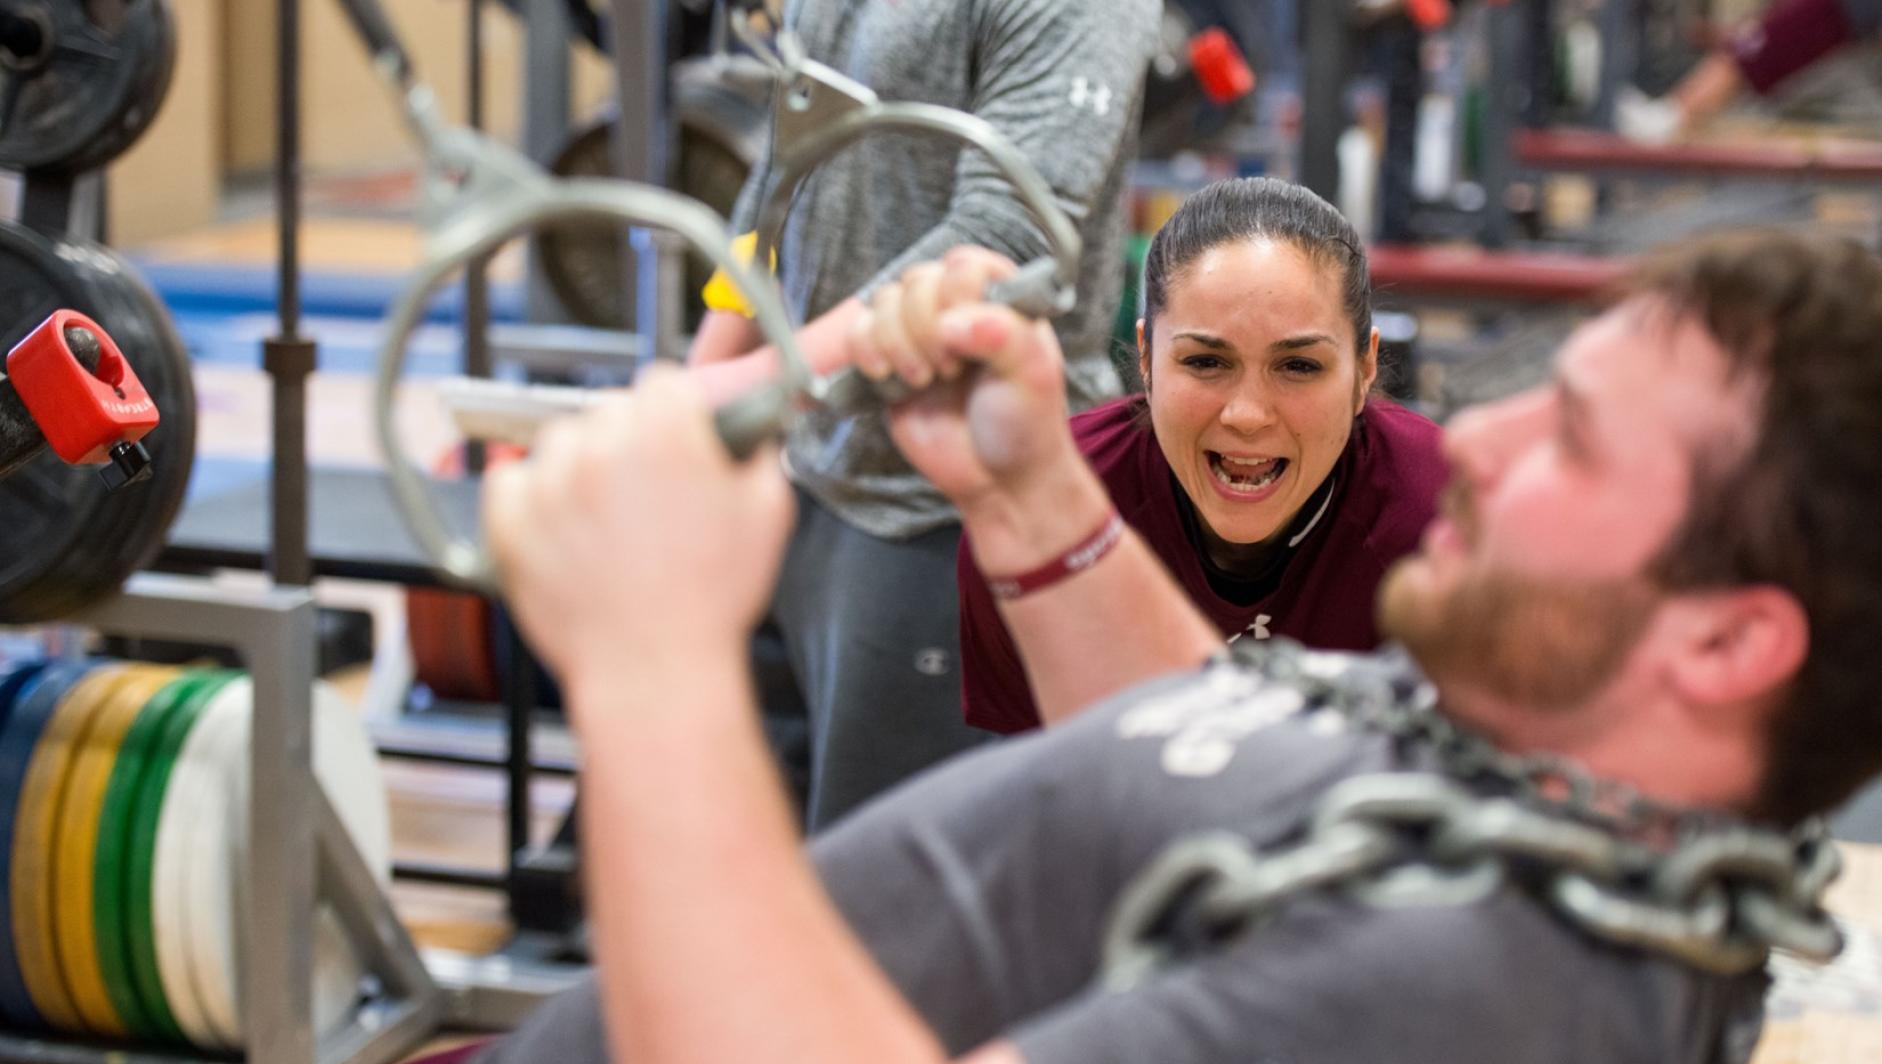 A student strength and conditioning coach yells words of encouragement as a student works out his arms.